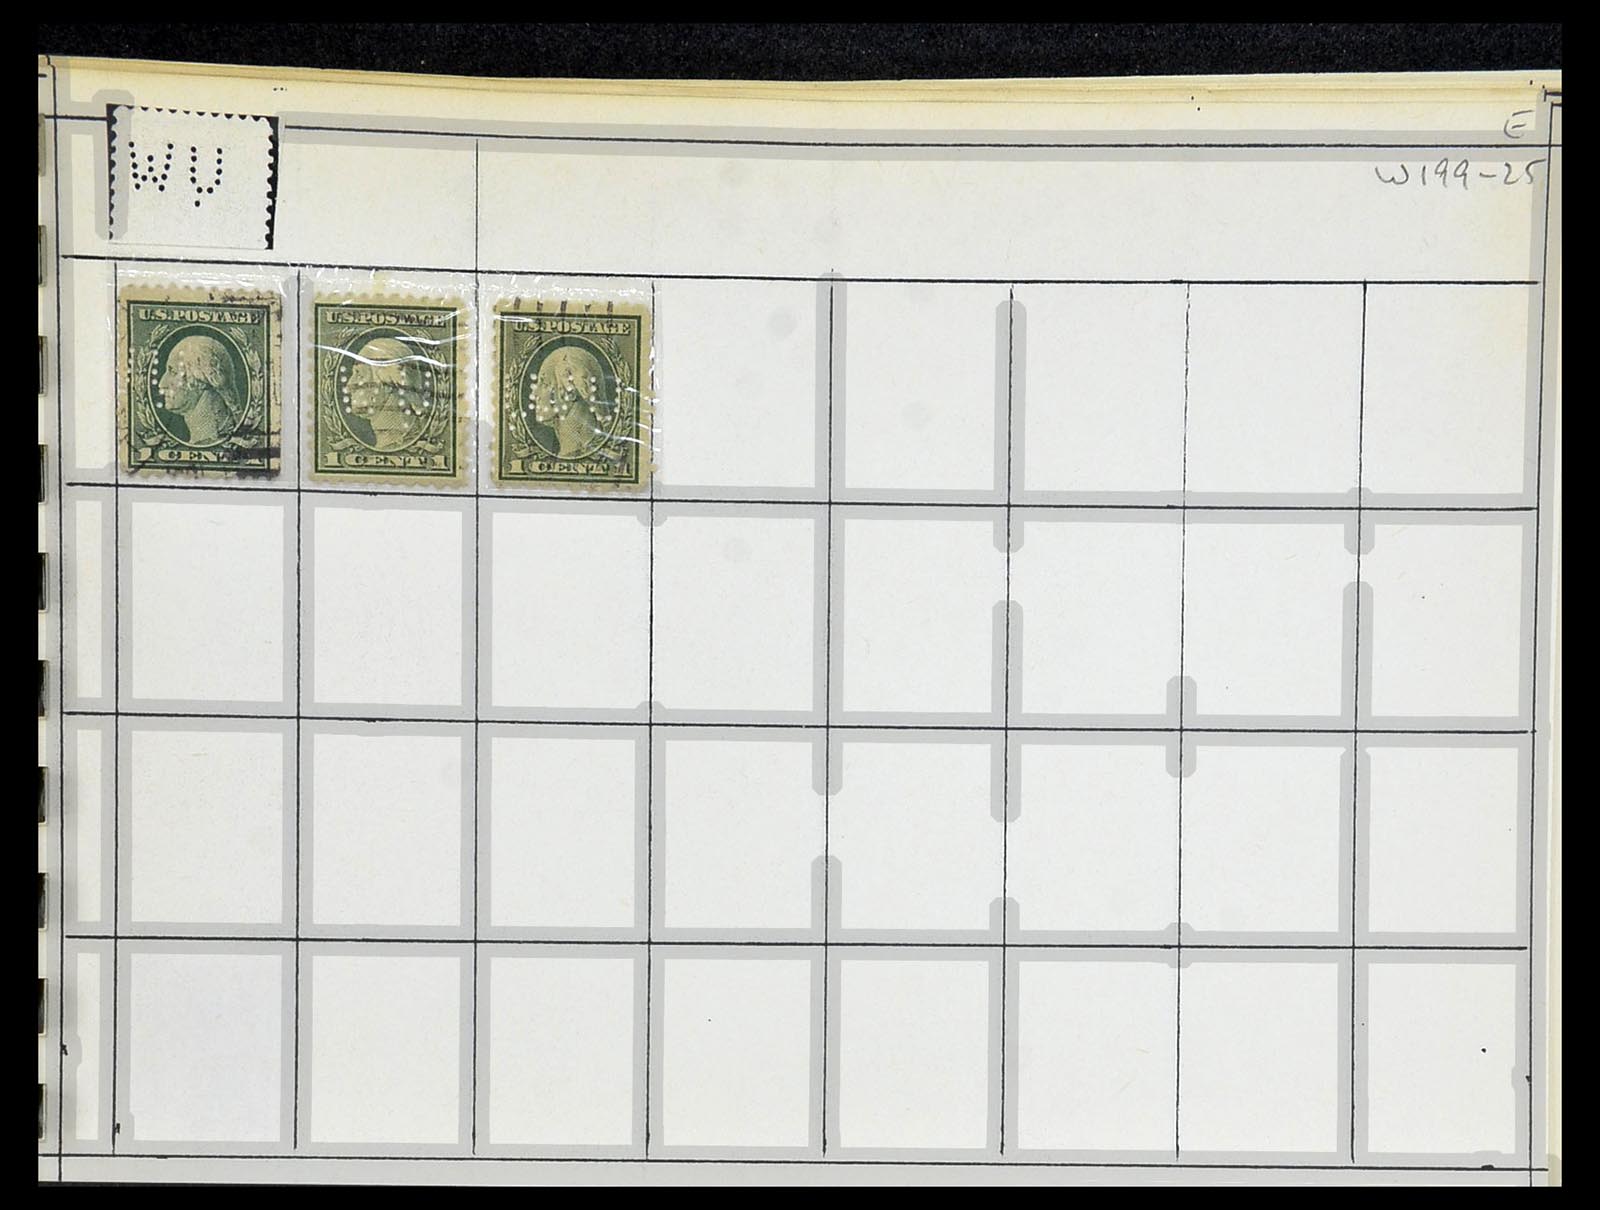 34417 802 - Stamp Collection 34417 USA perfins 1900-1980.